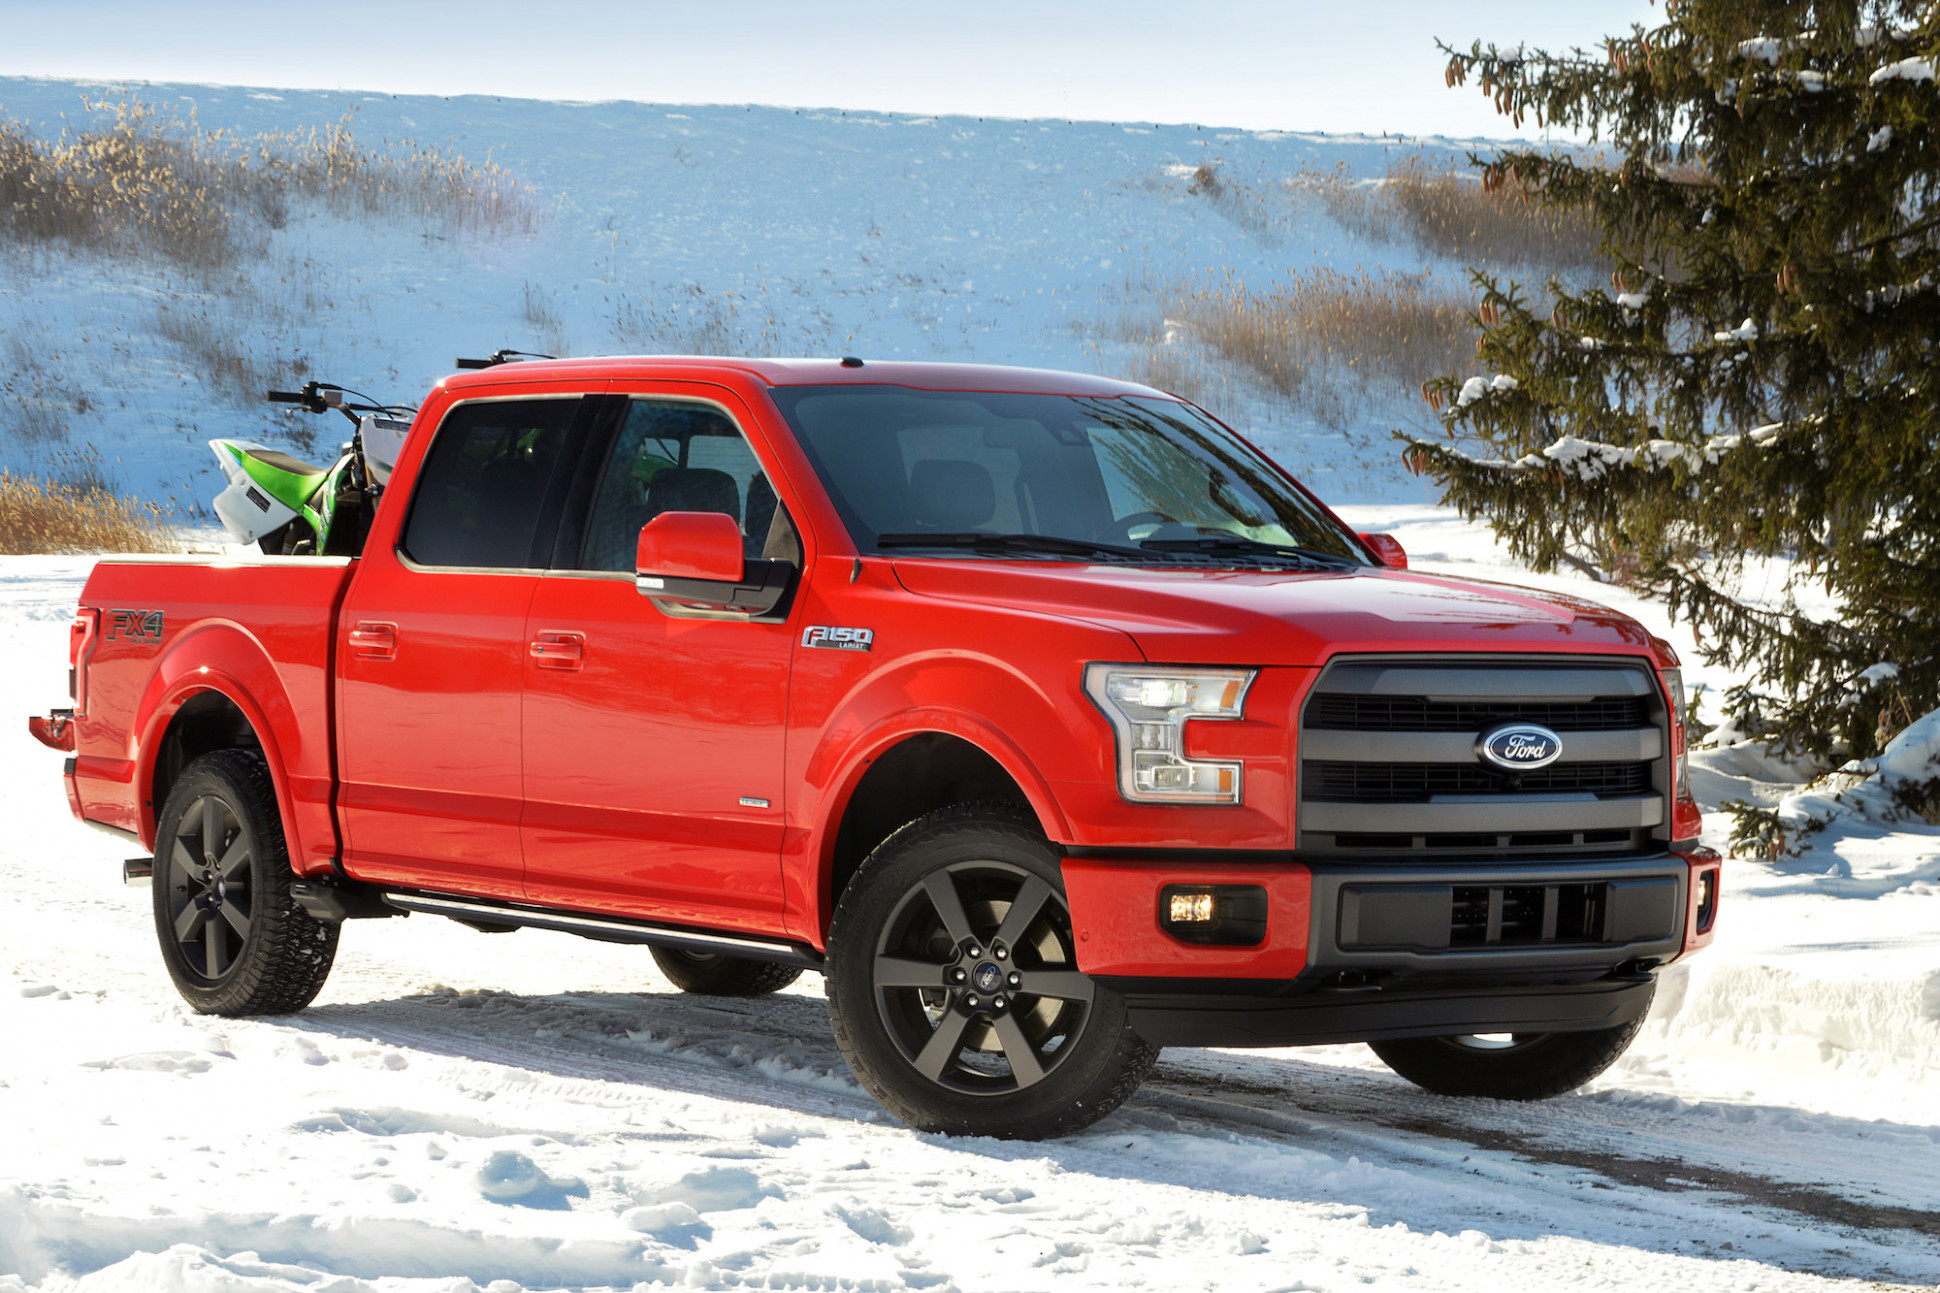 11 Ford F-11 SFE: Highest Gas Mileage Model For Aluminum Pickup